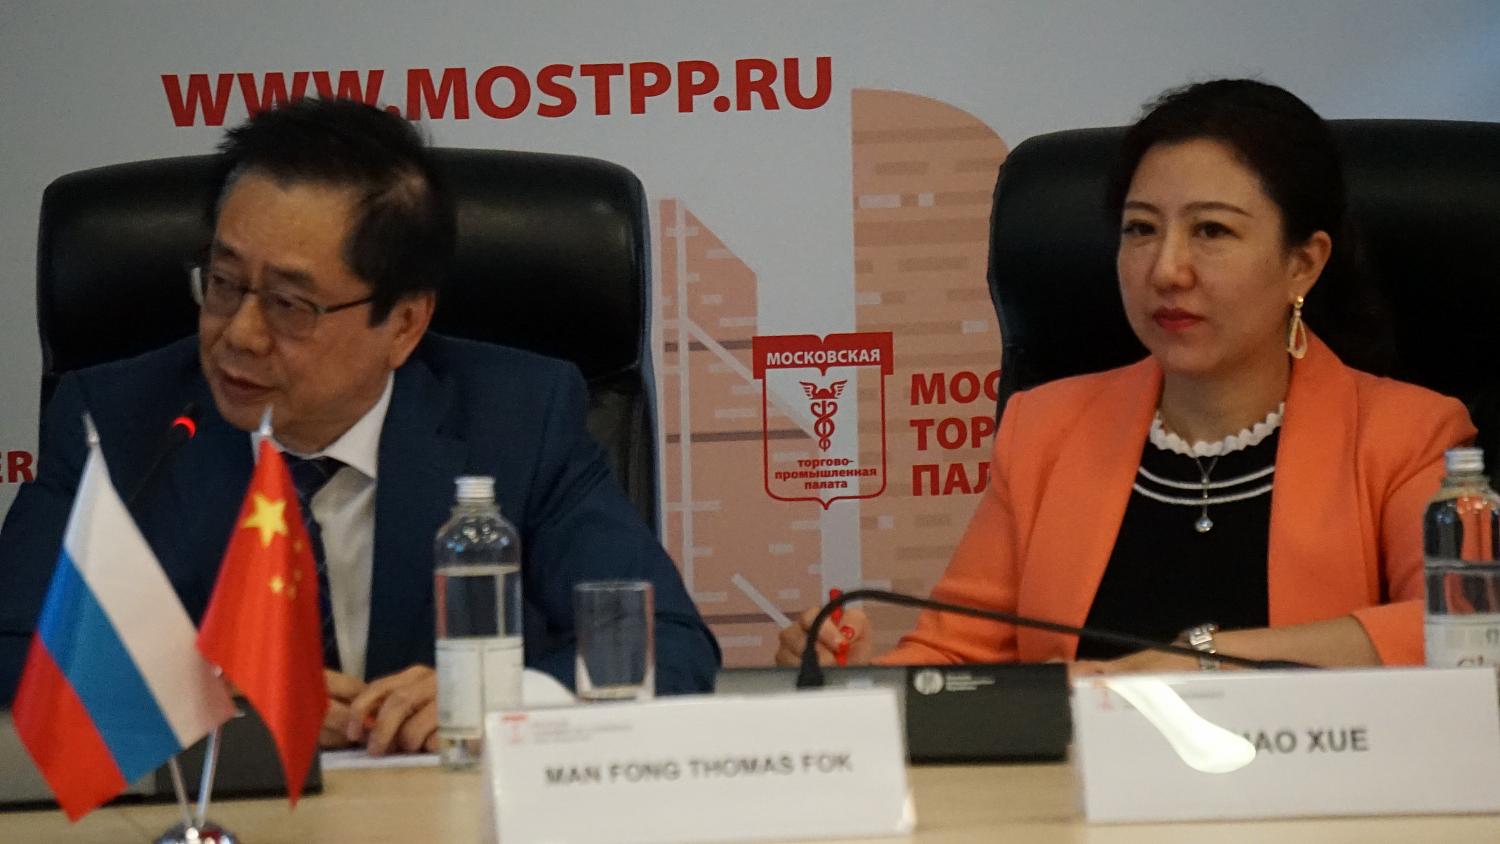 Moscow entrepreneurs discussed promising areas of cooperation with colleagues from China